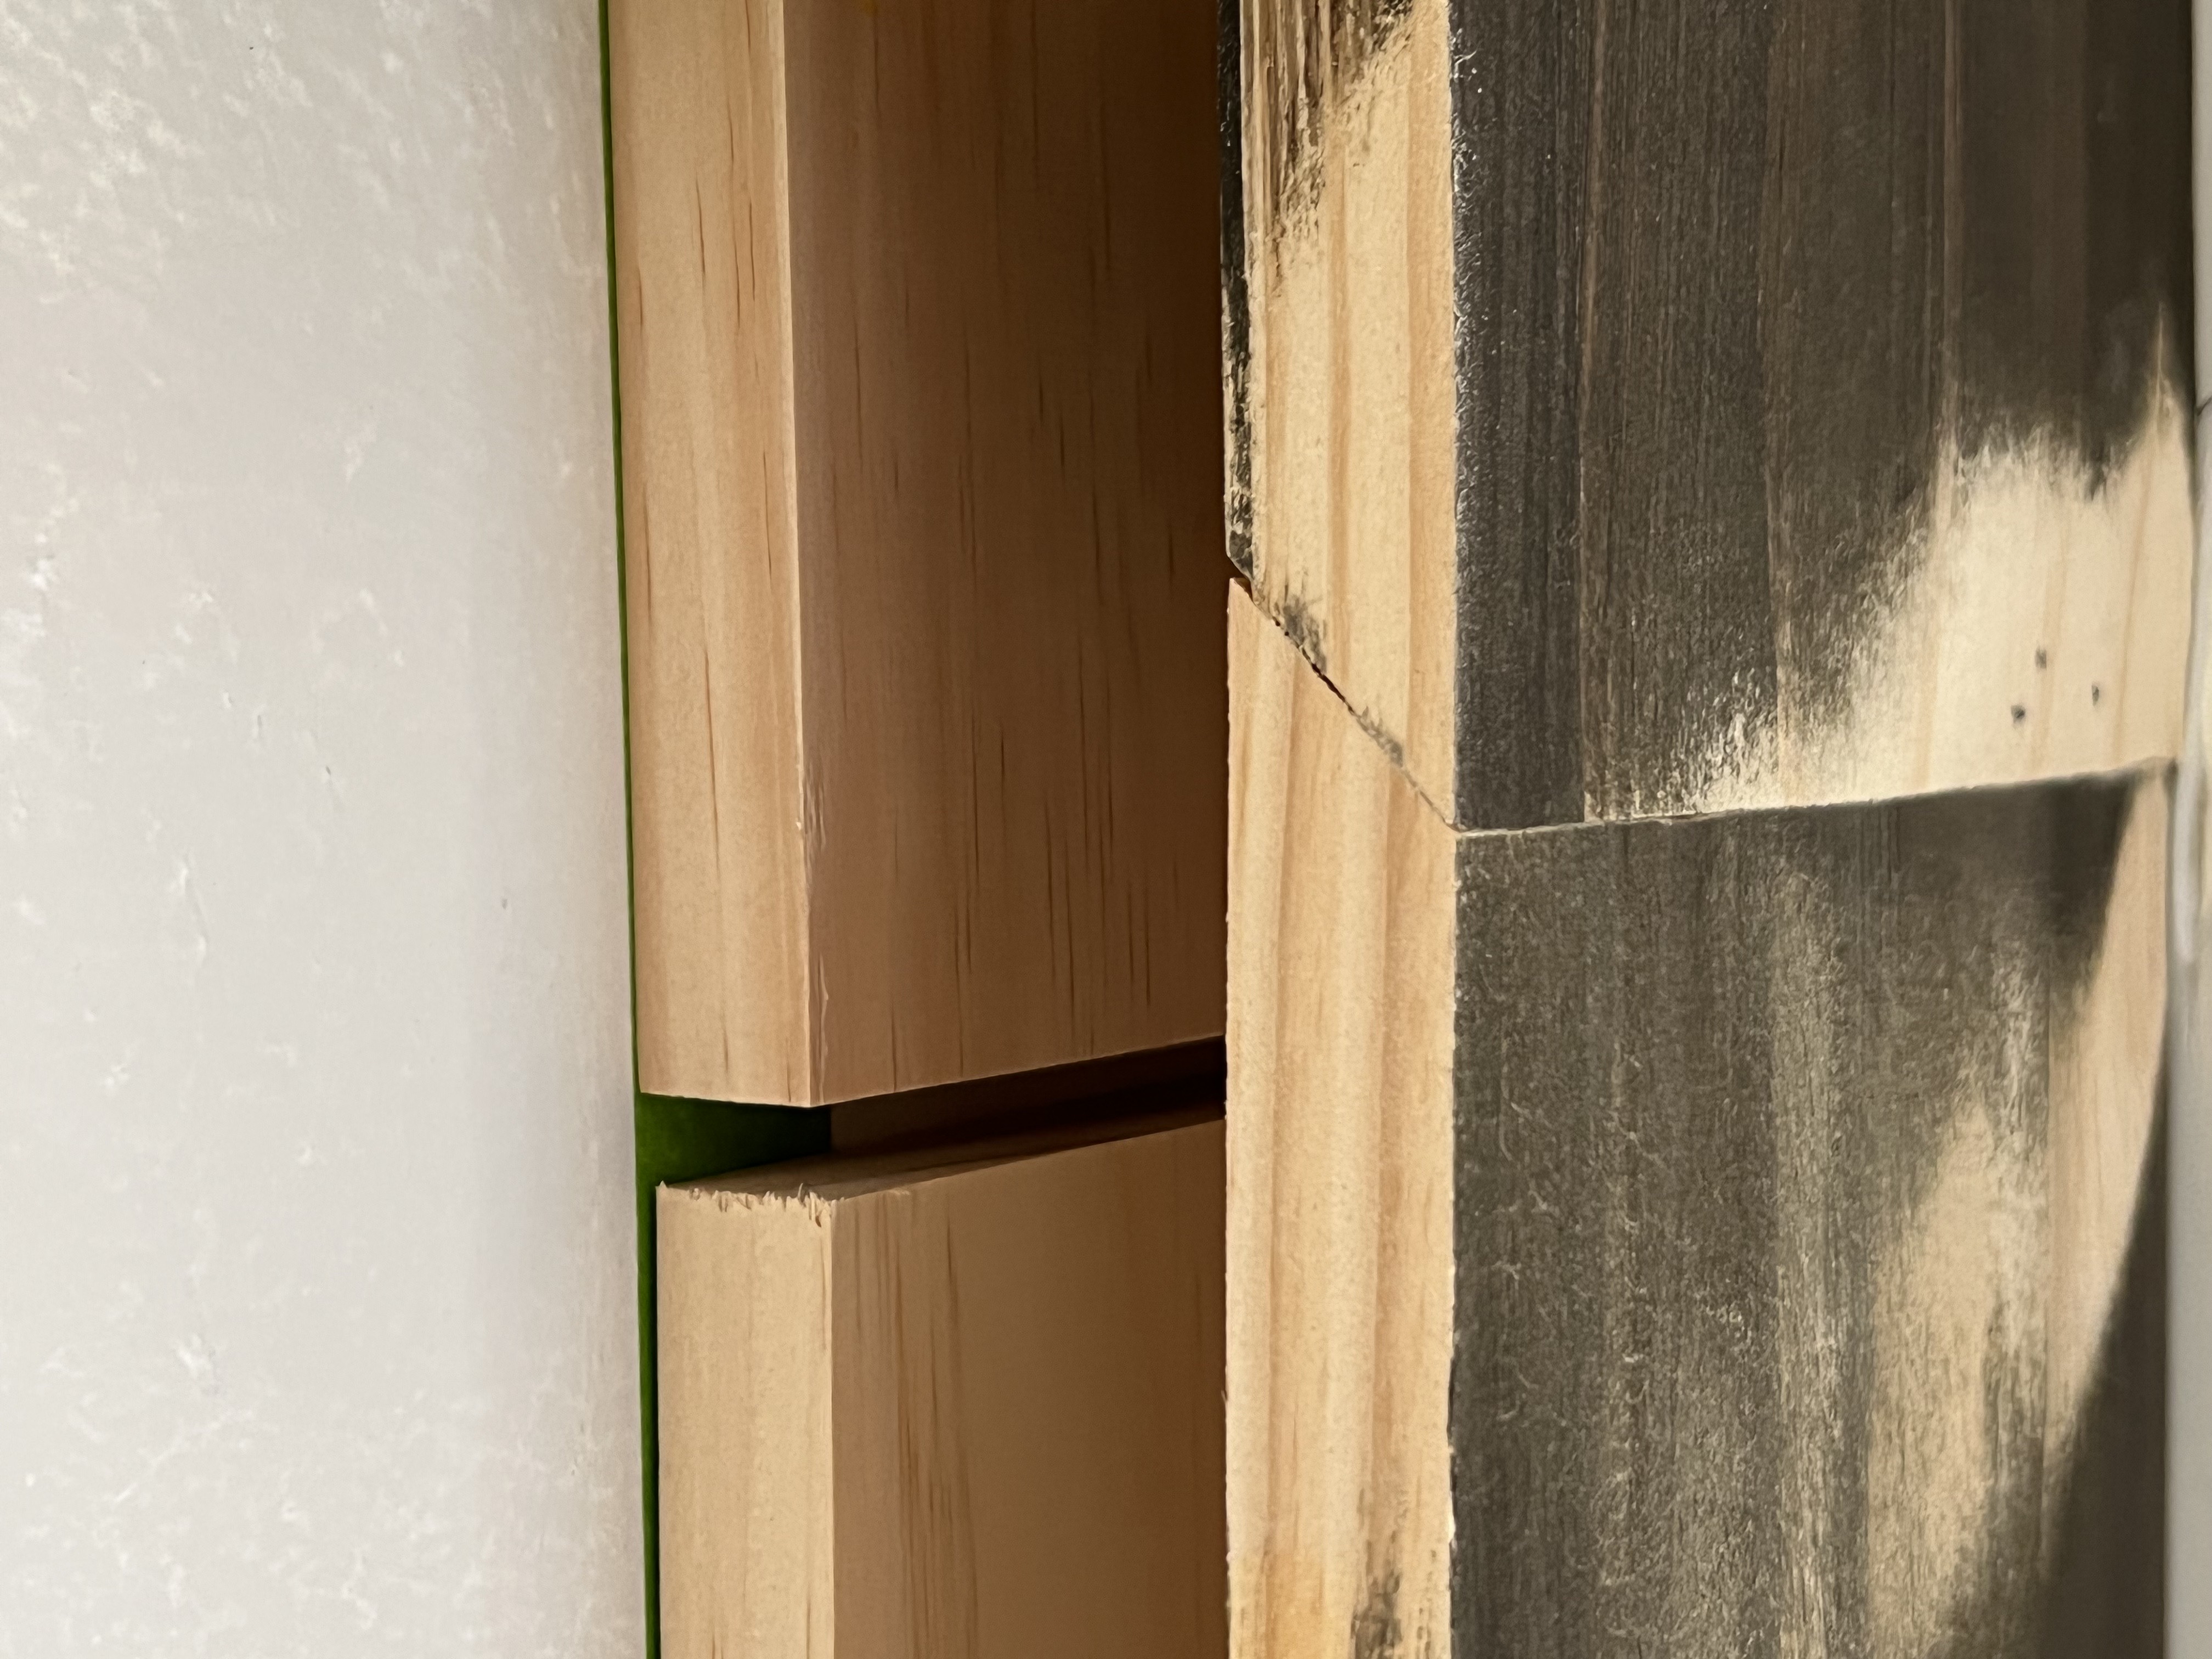 Image of a 45 degree beveled seam joining two pieces of wood together.